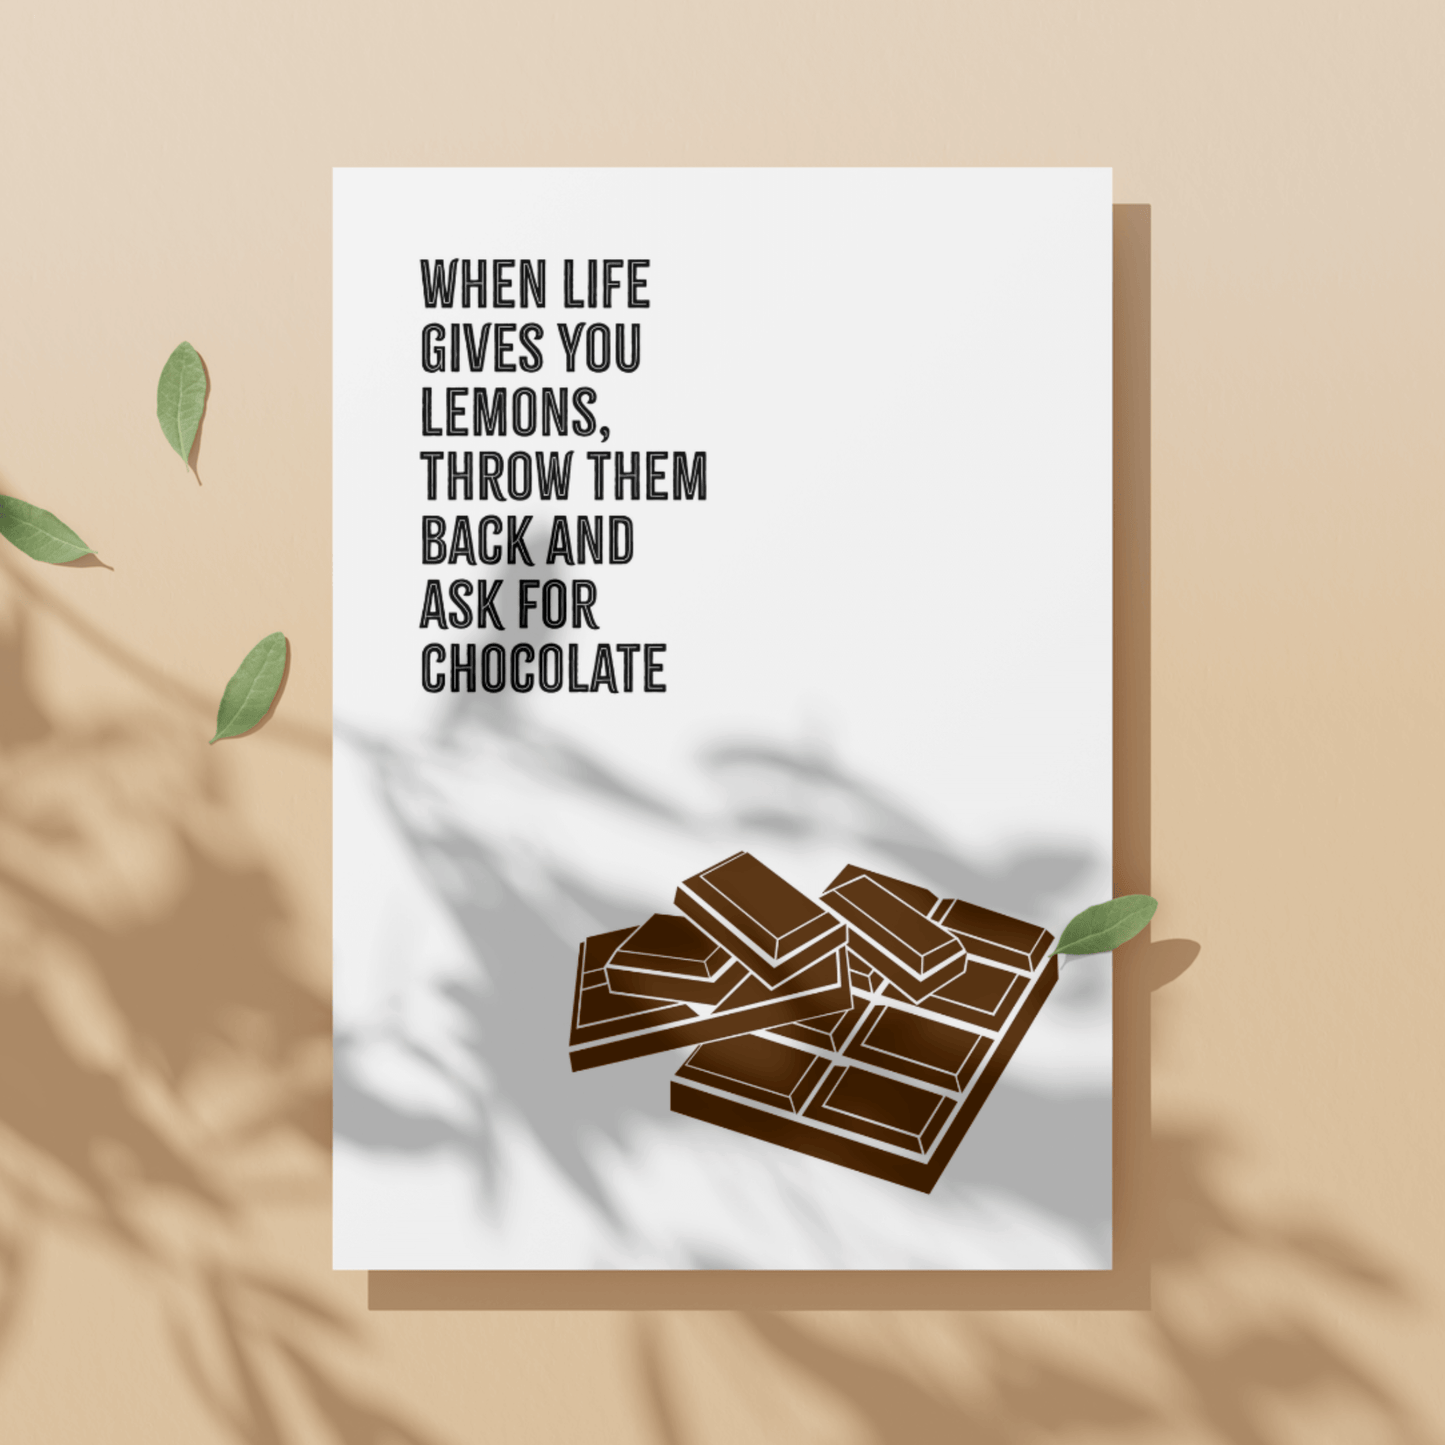 Little Kraken's When Life Gives You Lemons, Throw Them Back and Ask For Chocolate, Sorry Card for £3.50 each